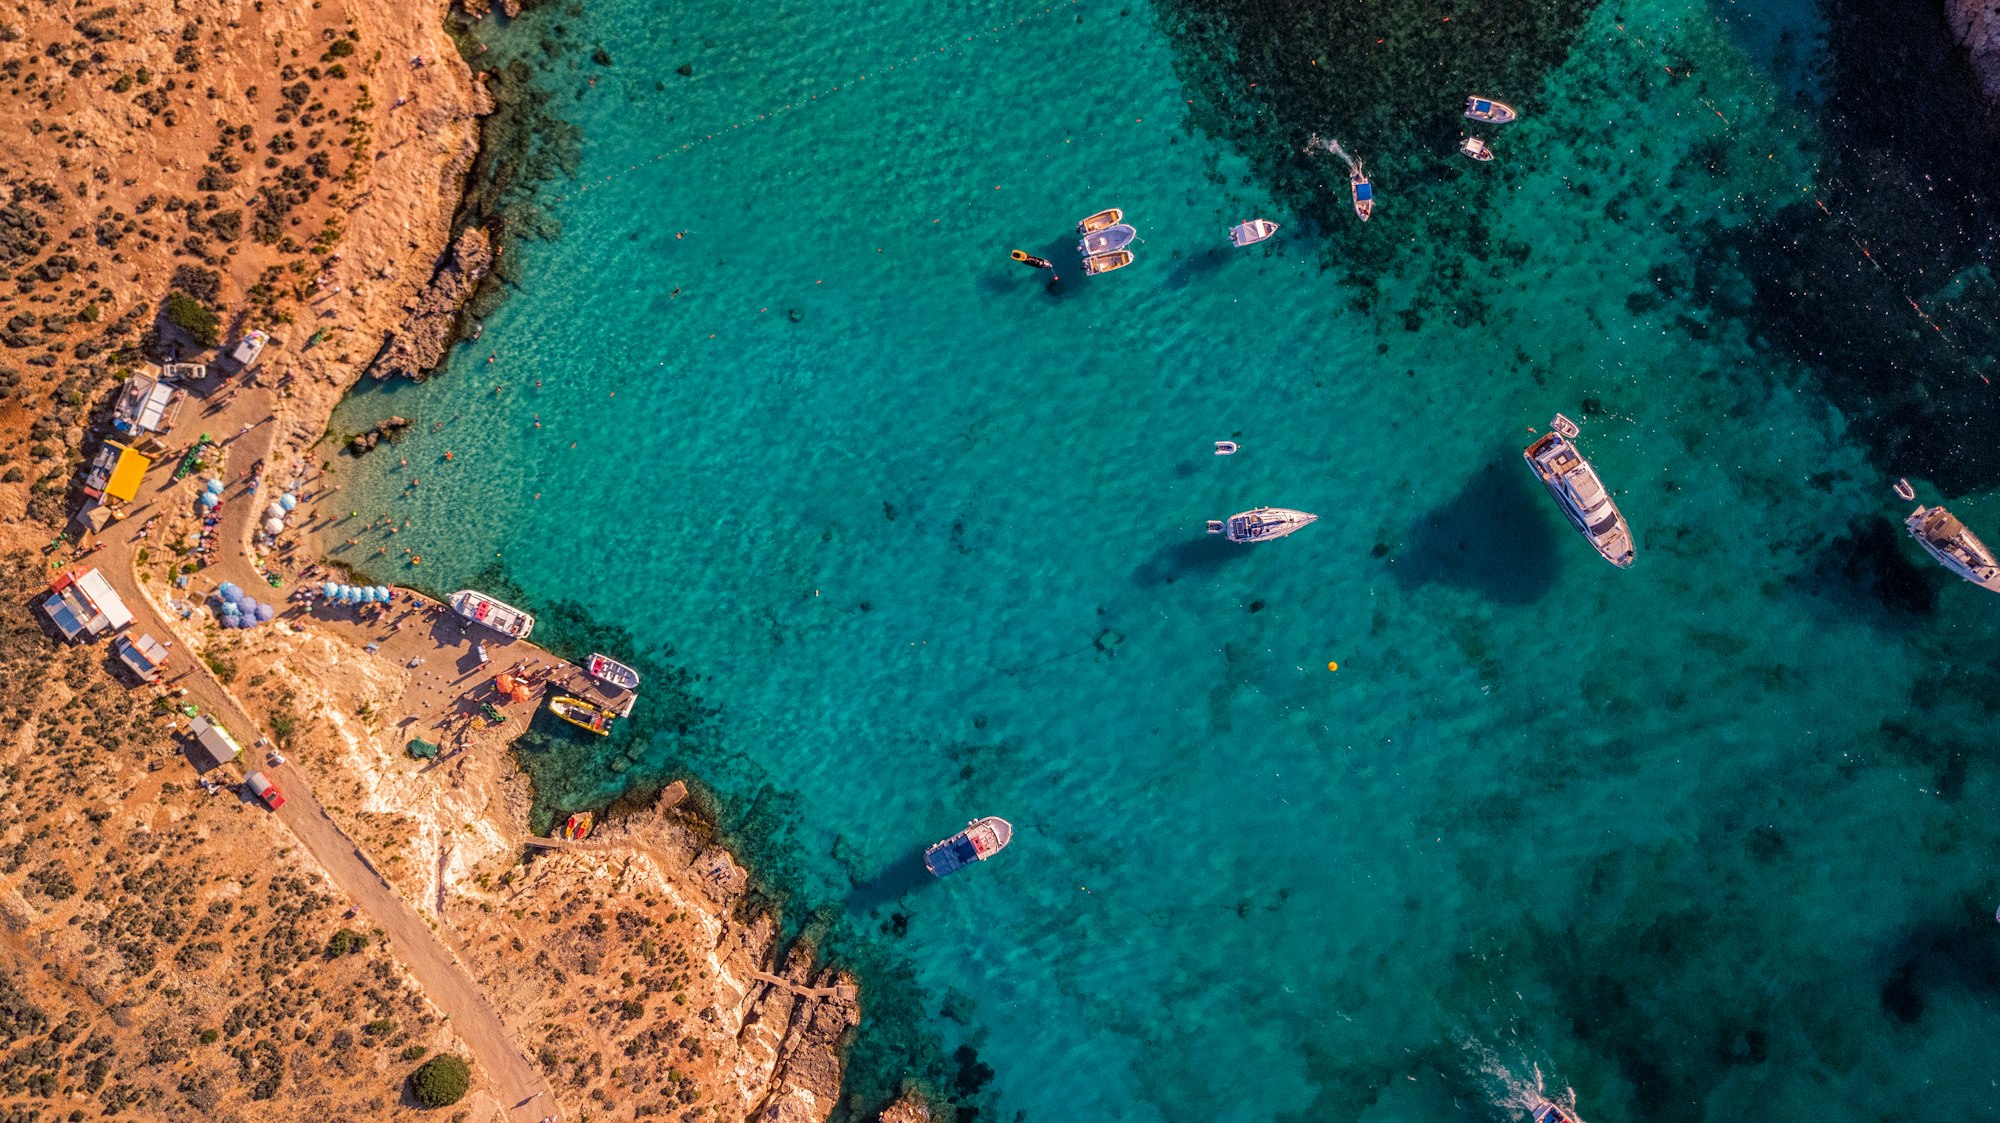 Blue Lagoon, aerial view of blue sea water with boats near island Comino, Malta  Photo by Mike Nahlii / Unsplash